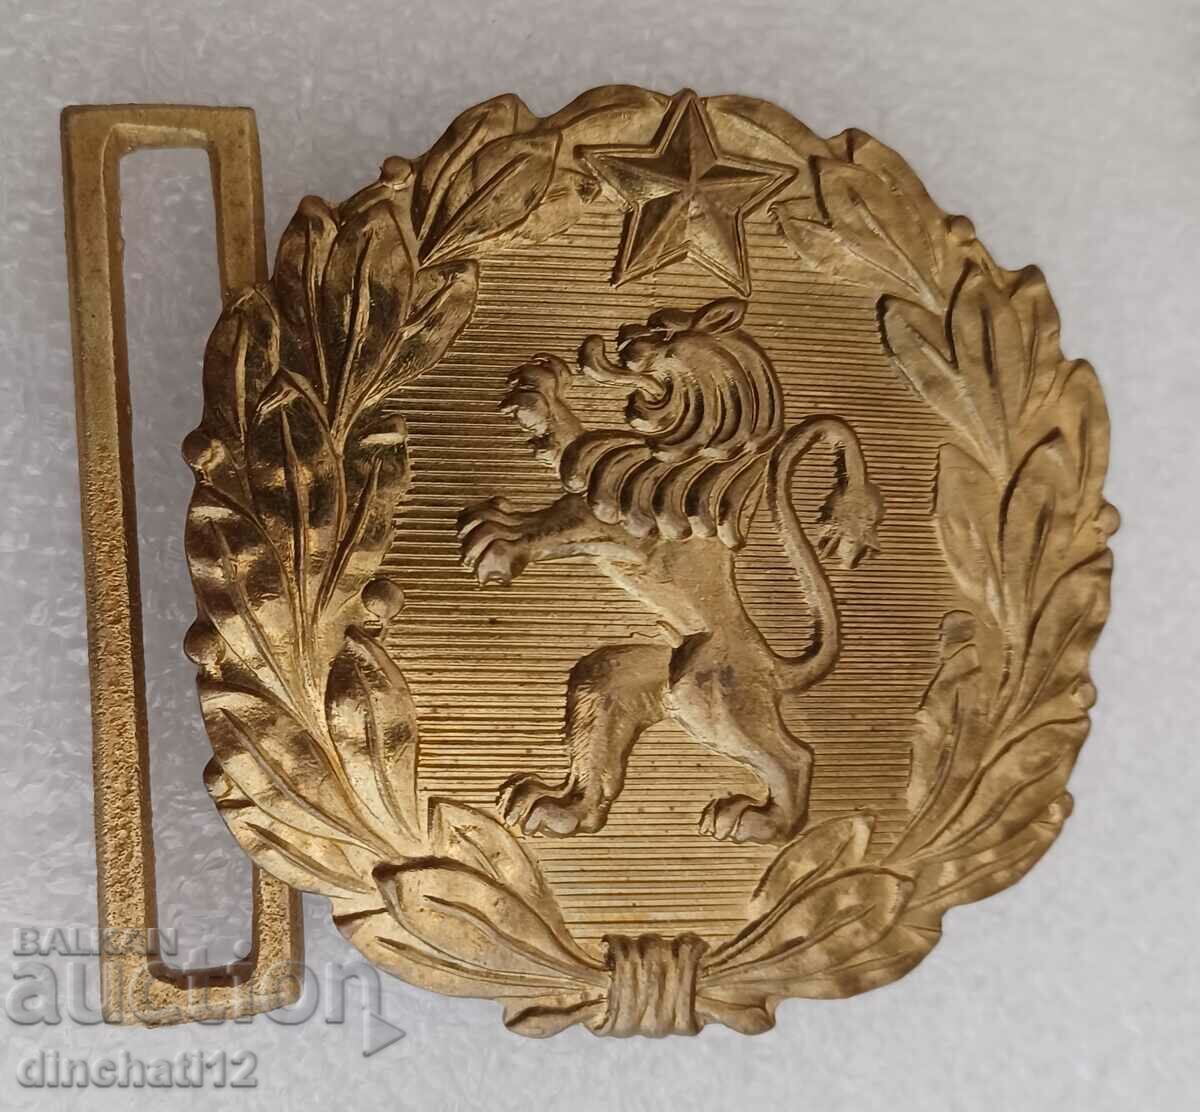 Military parade belt buckle